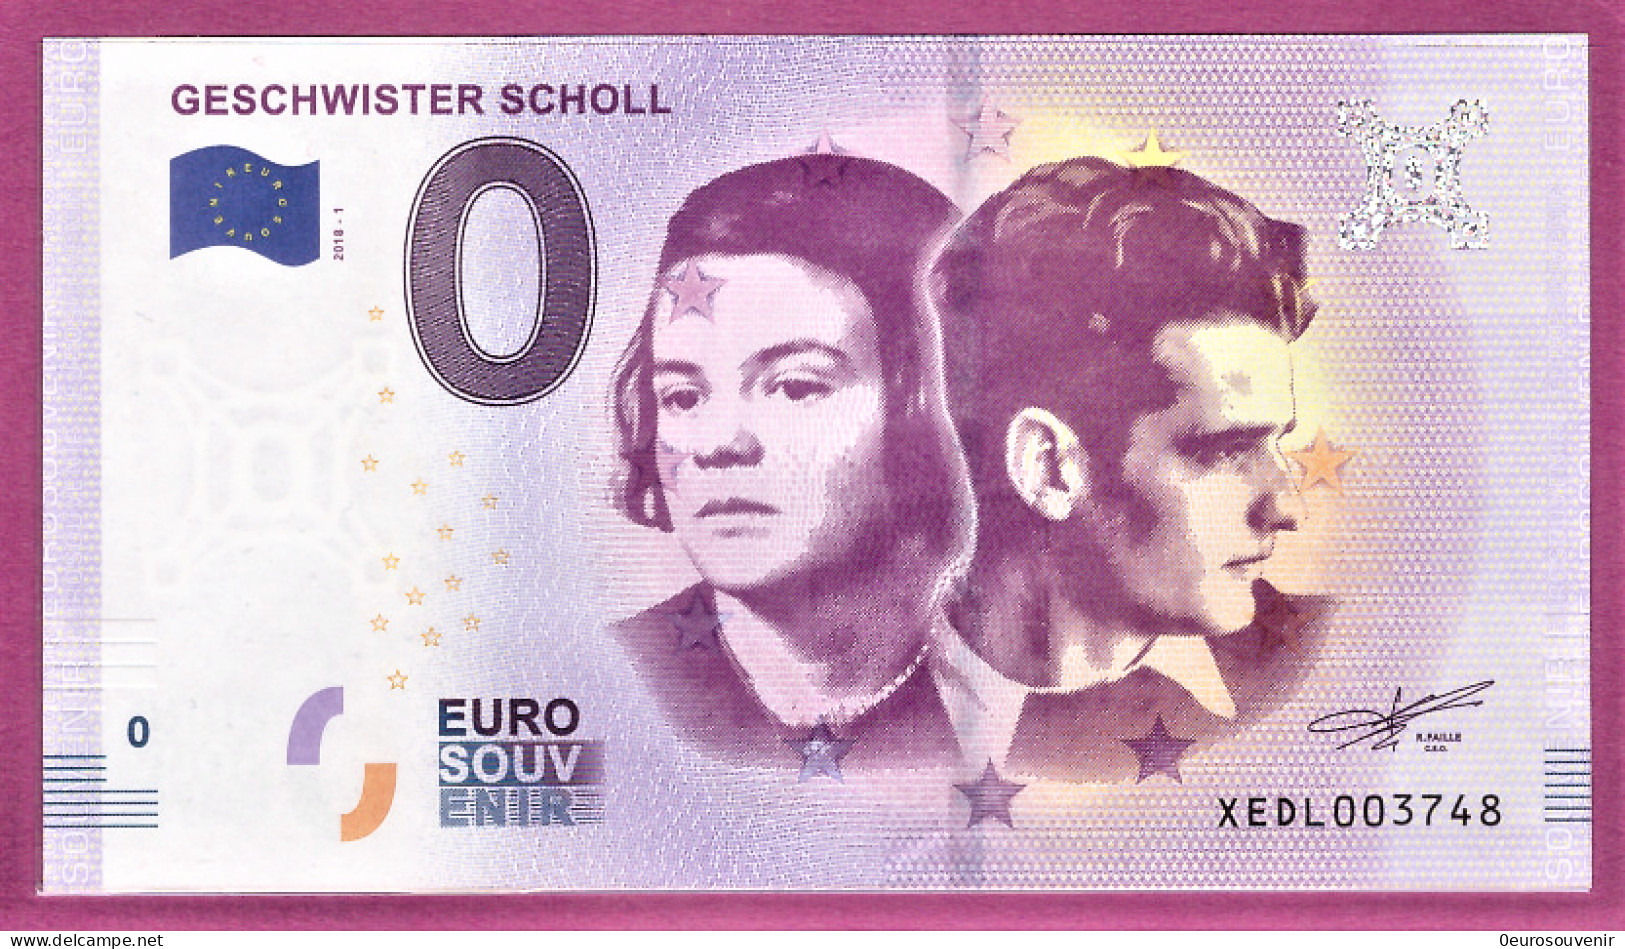 0-Euro XEDL 2018-1 GESCHWISTER SCHOLL - Private Proofs / Unofficial